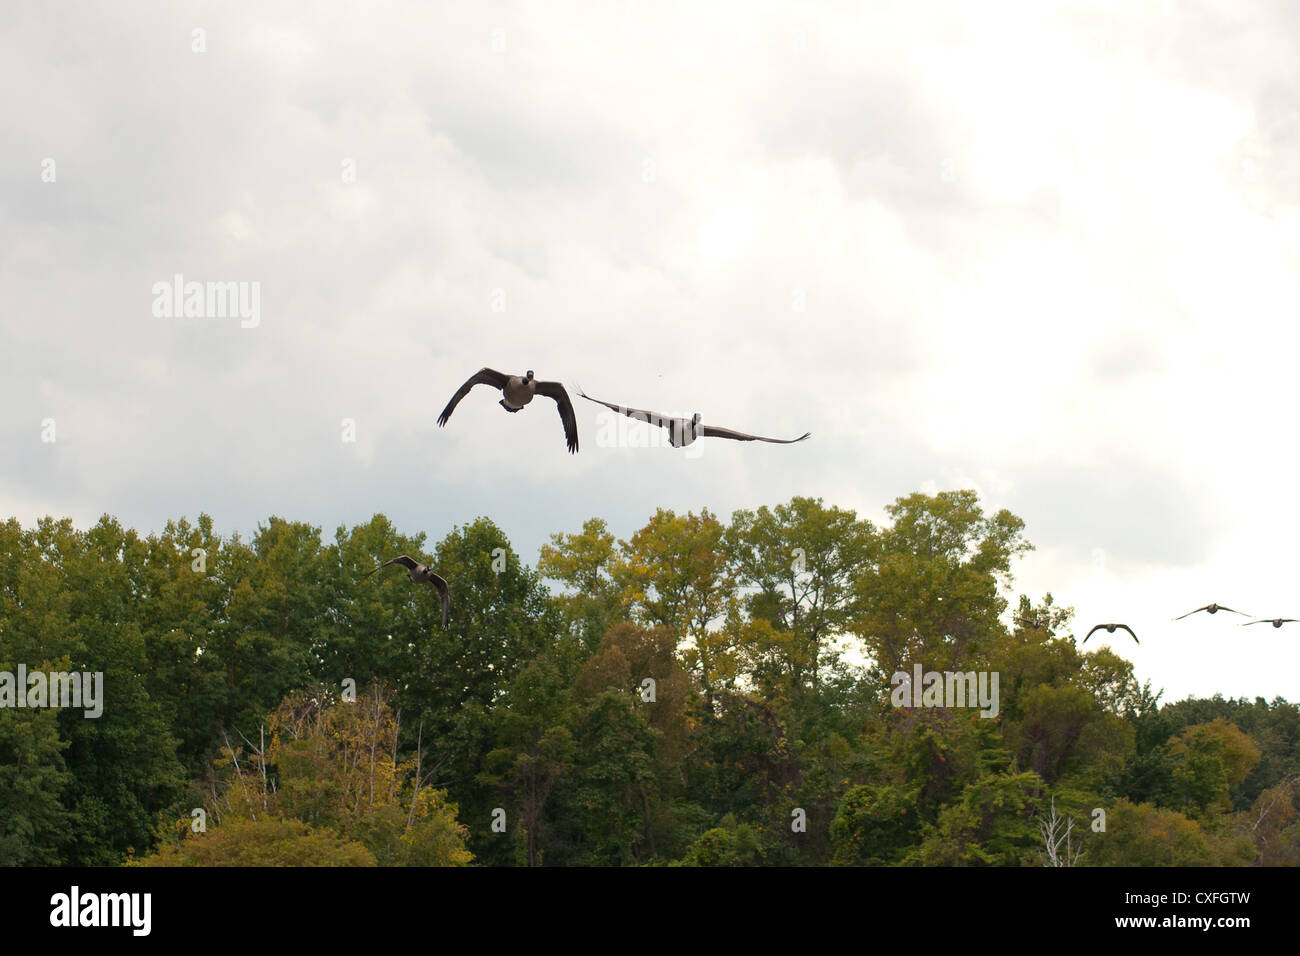 Canadian Geese in formation flying on a fall day Stock Photo